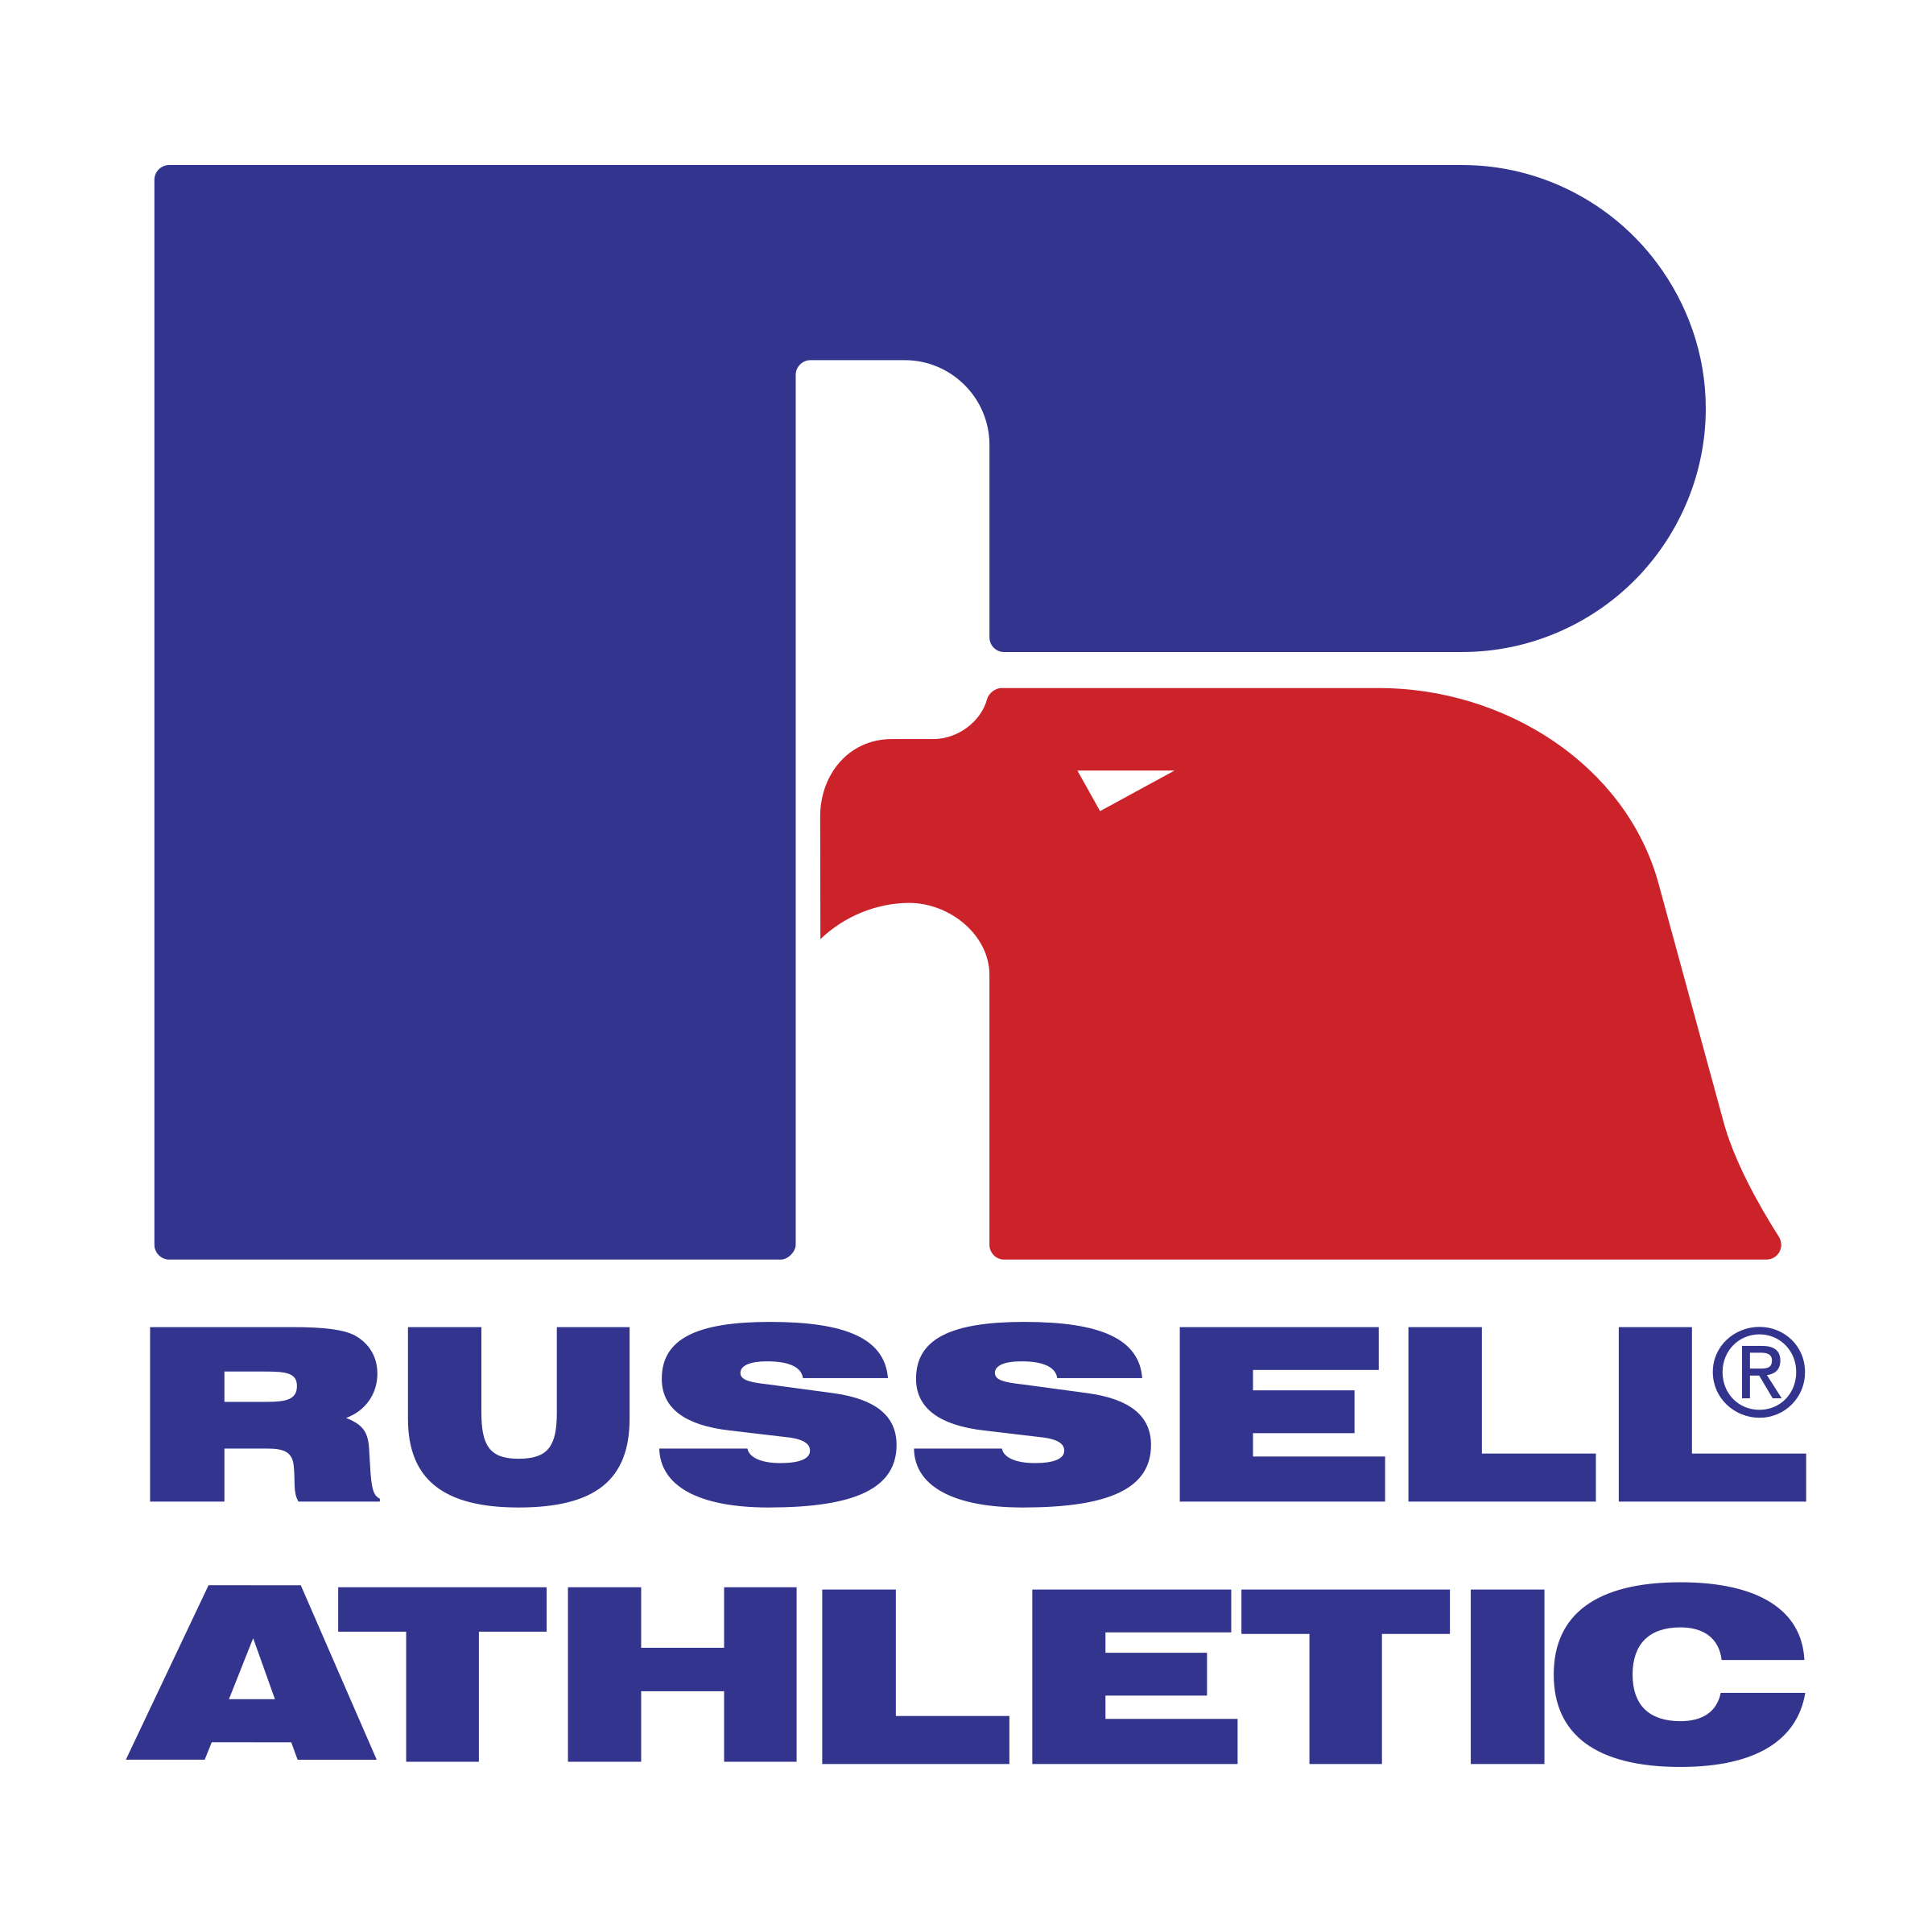 Russell Logo - Russell Athletic Logo PNG Transparent & SVG Vector - Freebie Supply